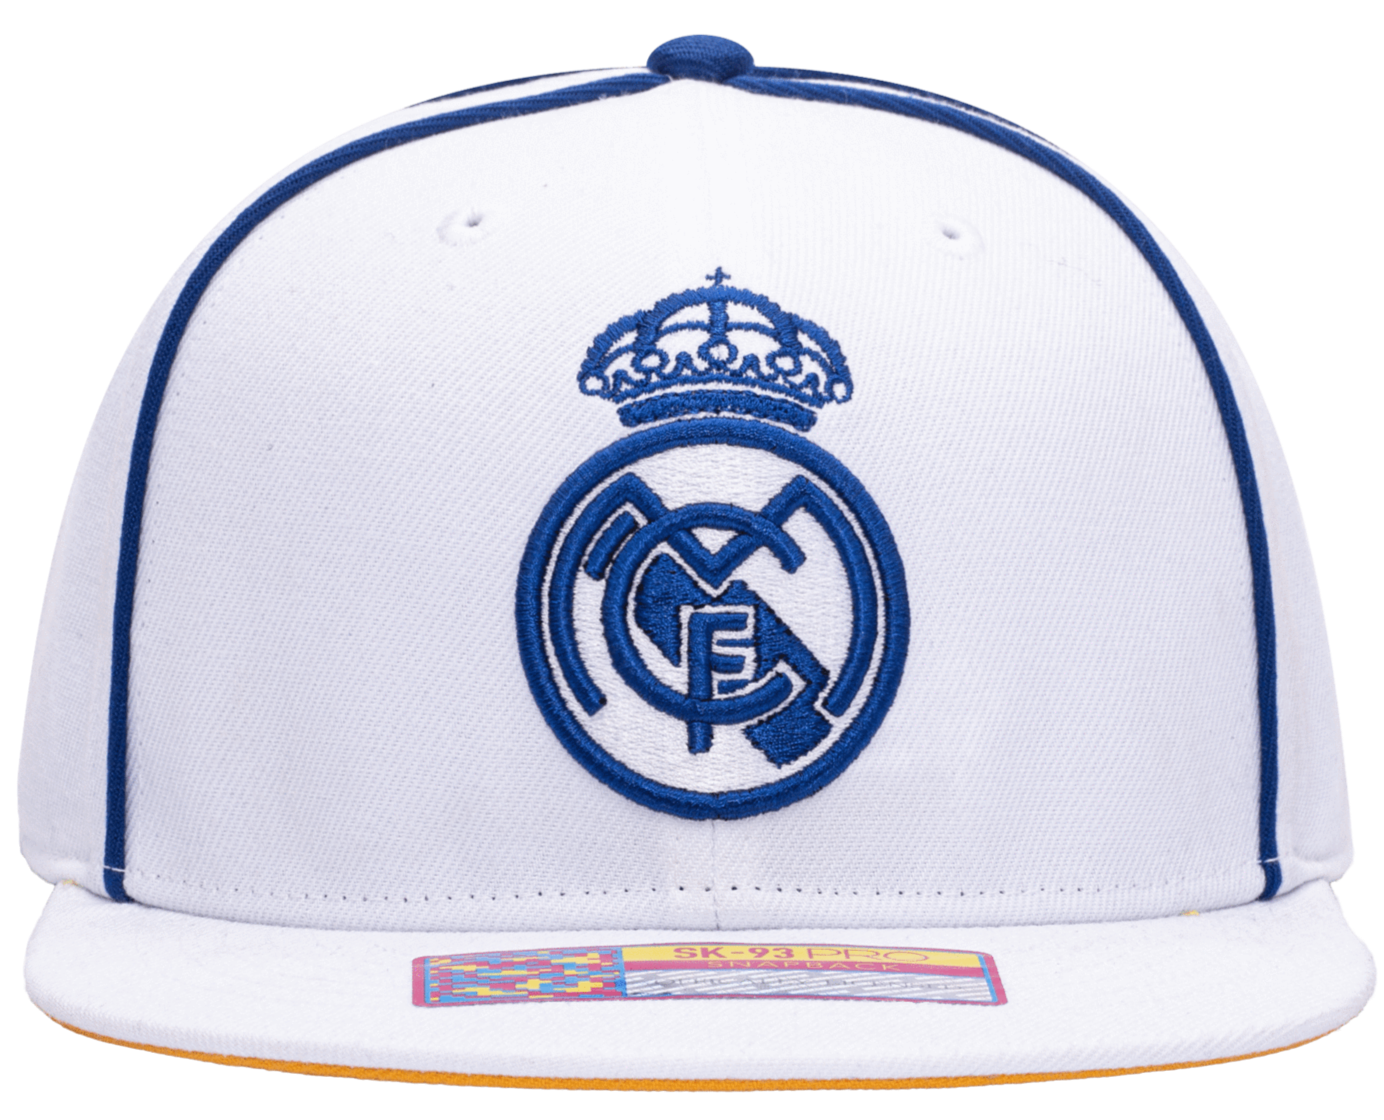 FI COLLECTIONS REAL MADRID CALI NIGHT SNAPBACK HAT